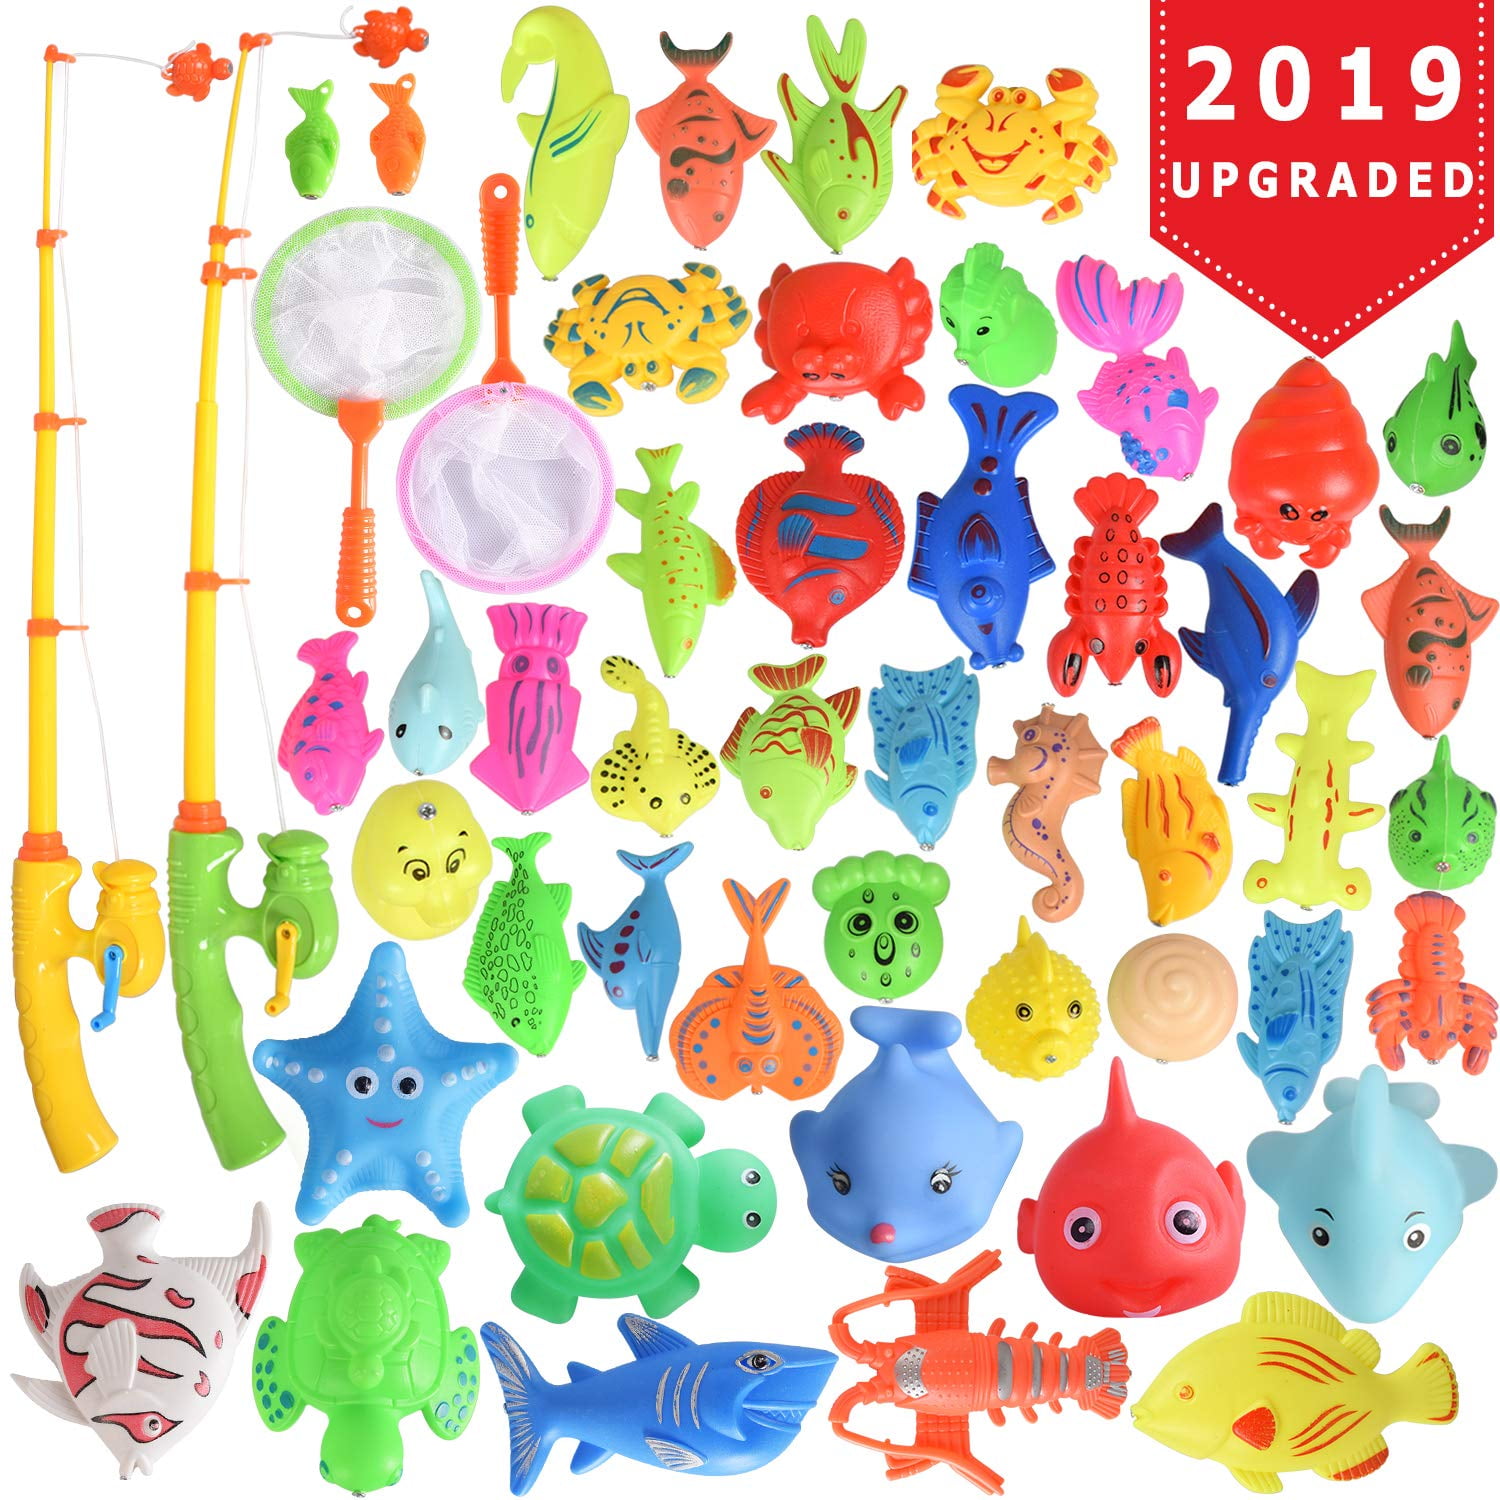 1 Set Of Magnetic Fishing Toy Fish Game Educational Fishing Toy Set For Kids 